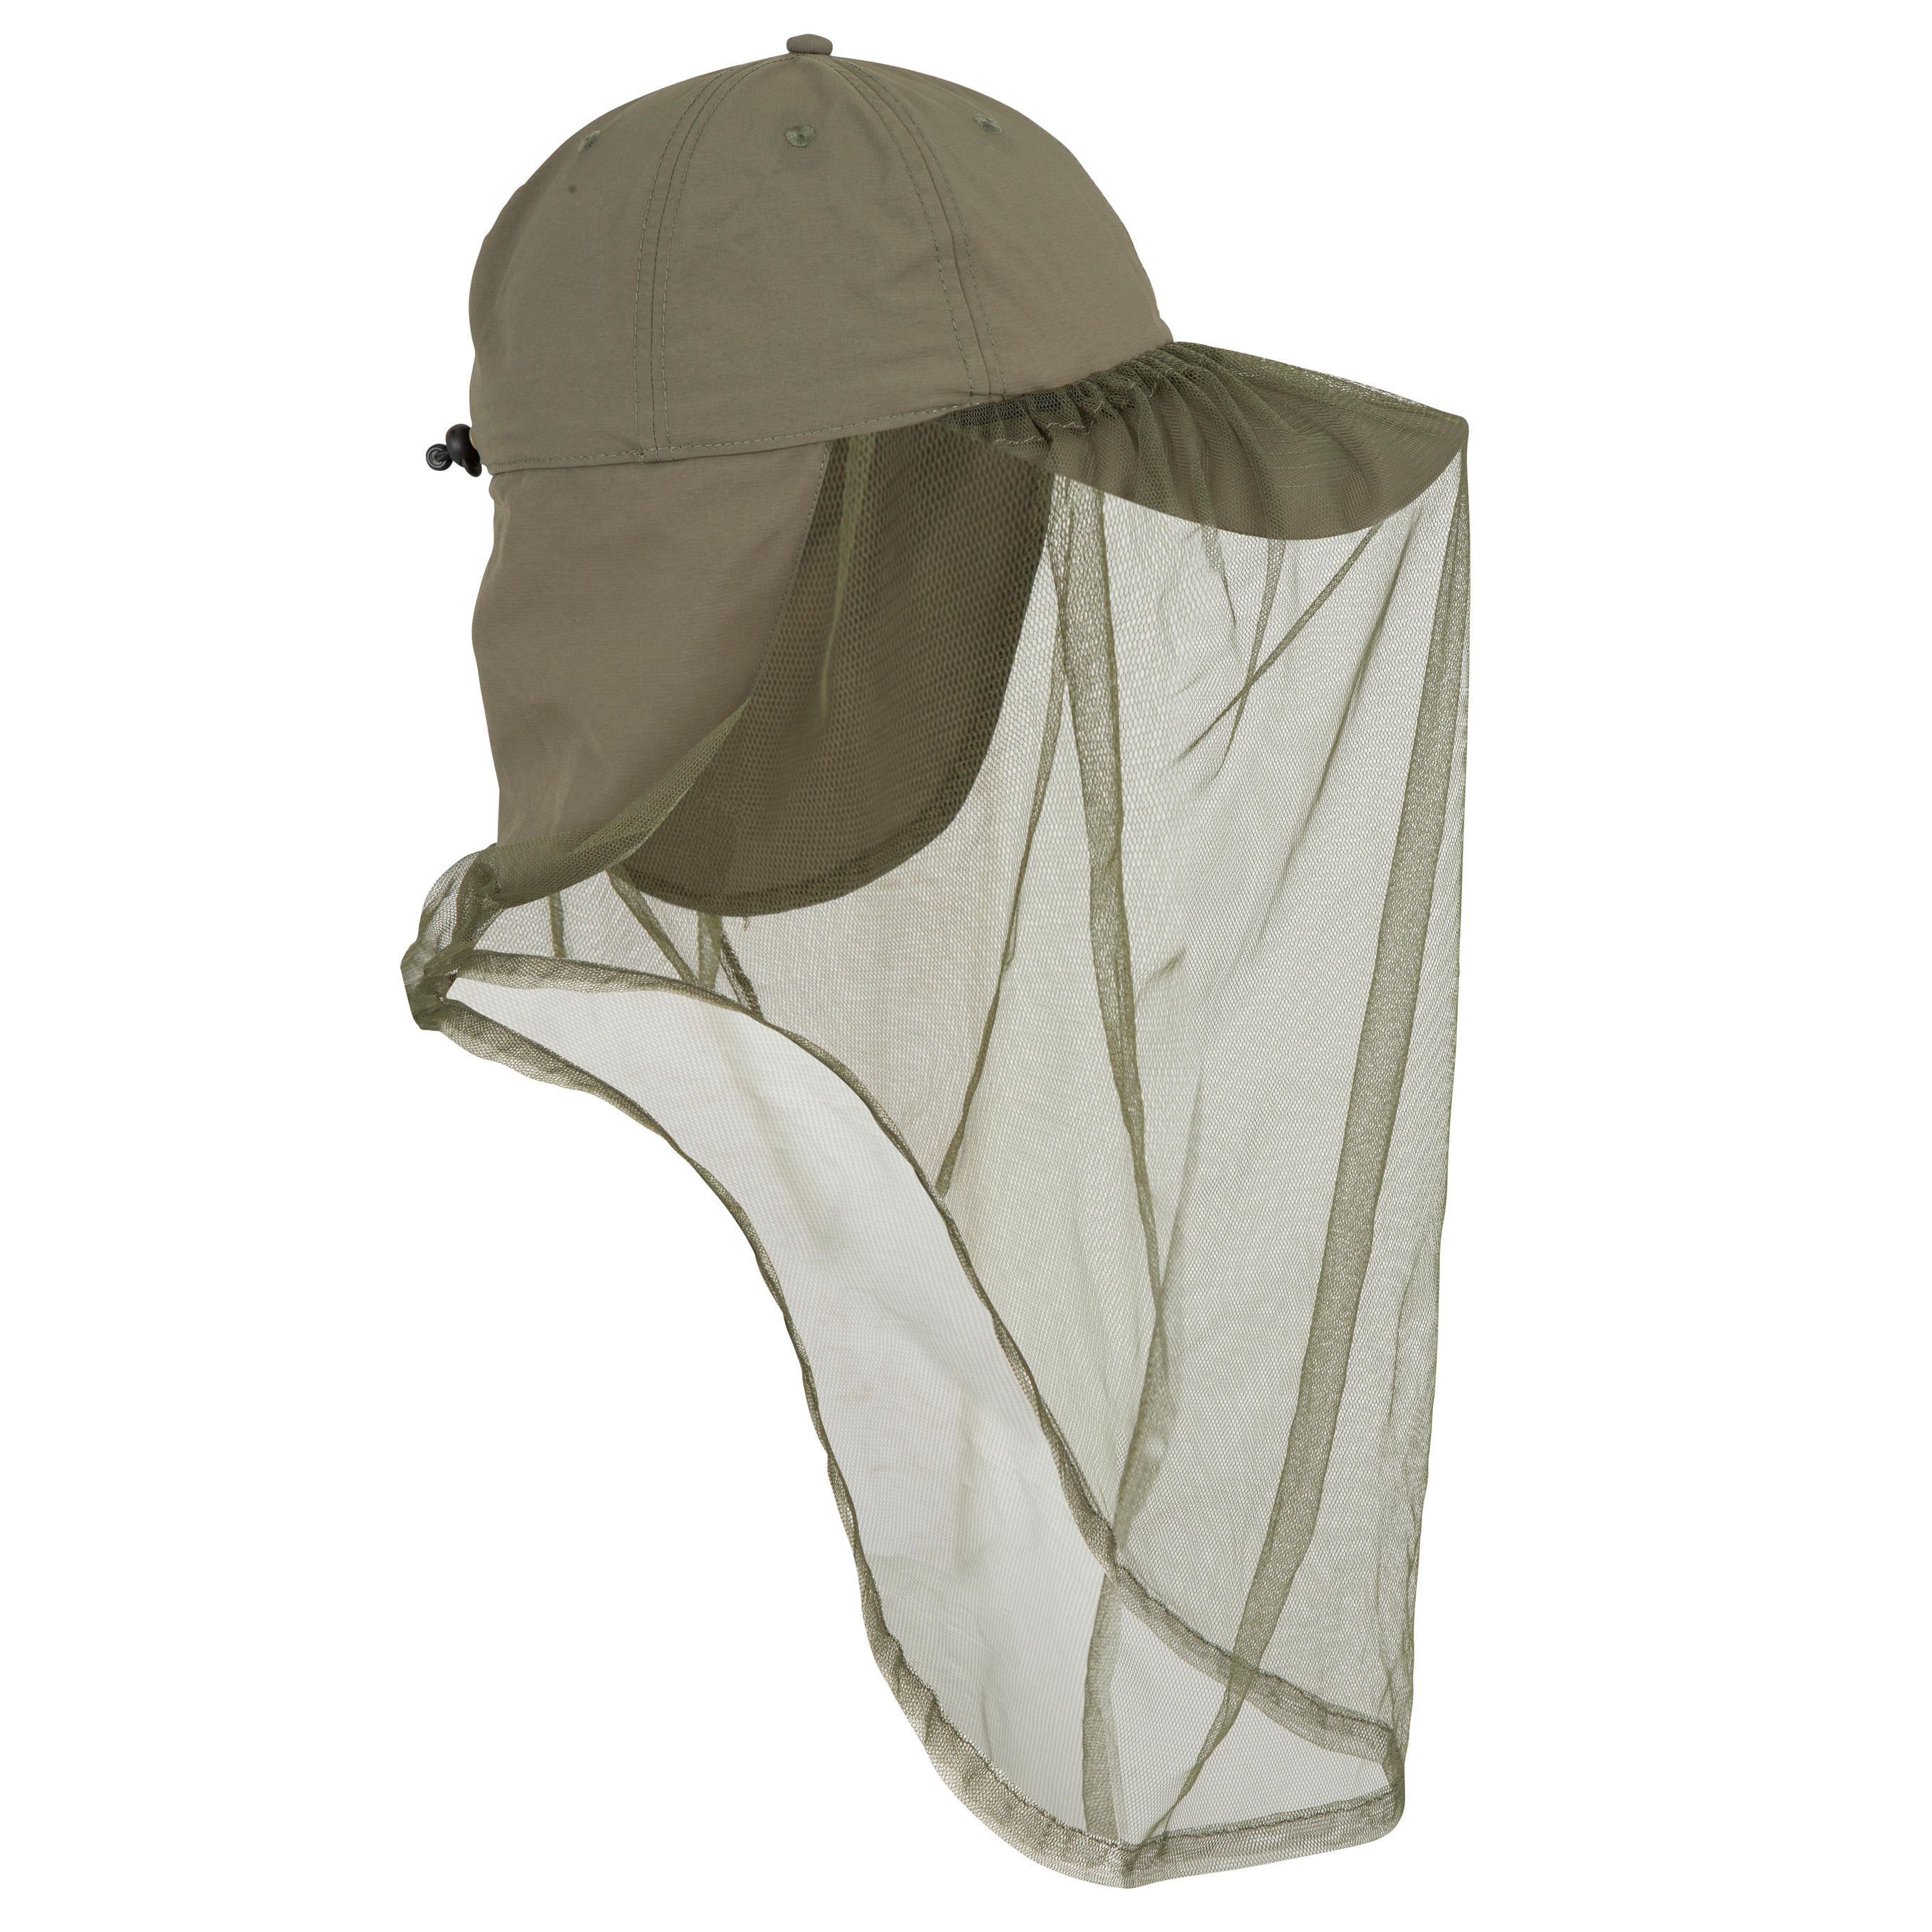 Mosquito Hunting Cap - Steppe 300 Green